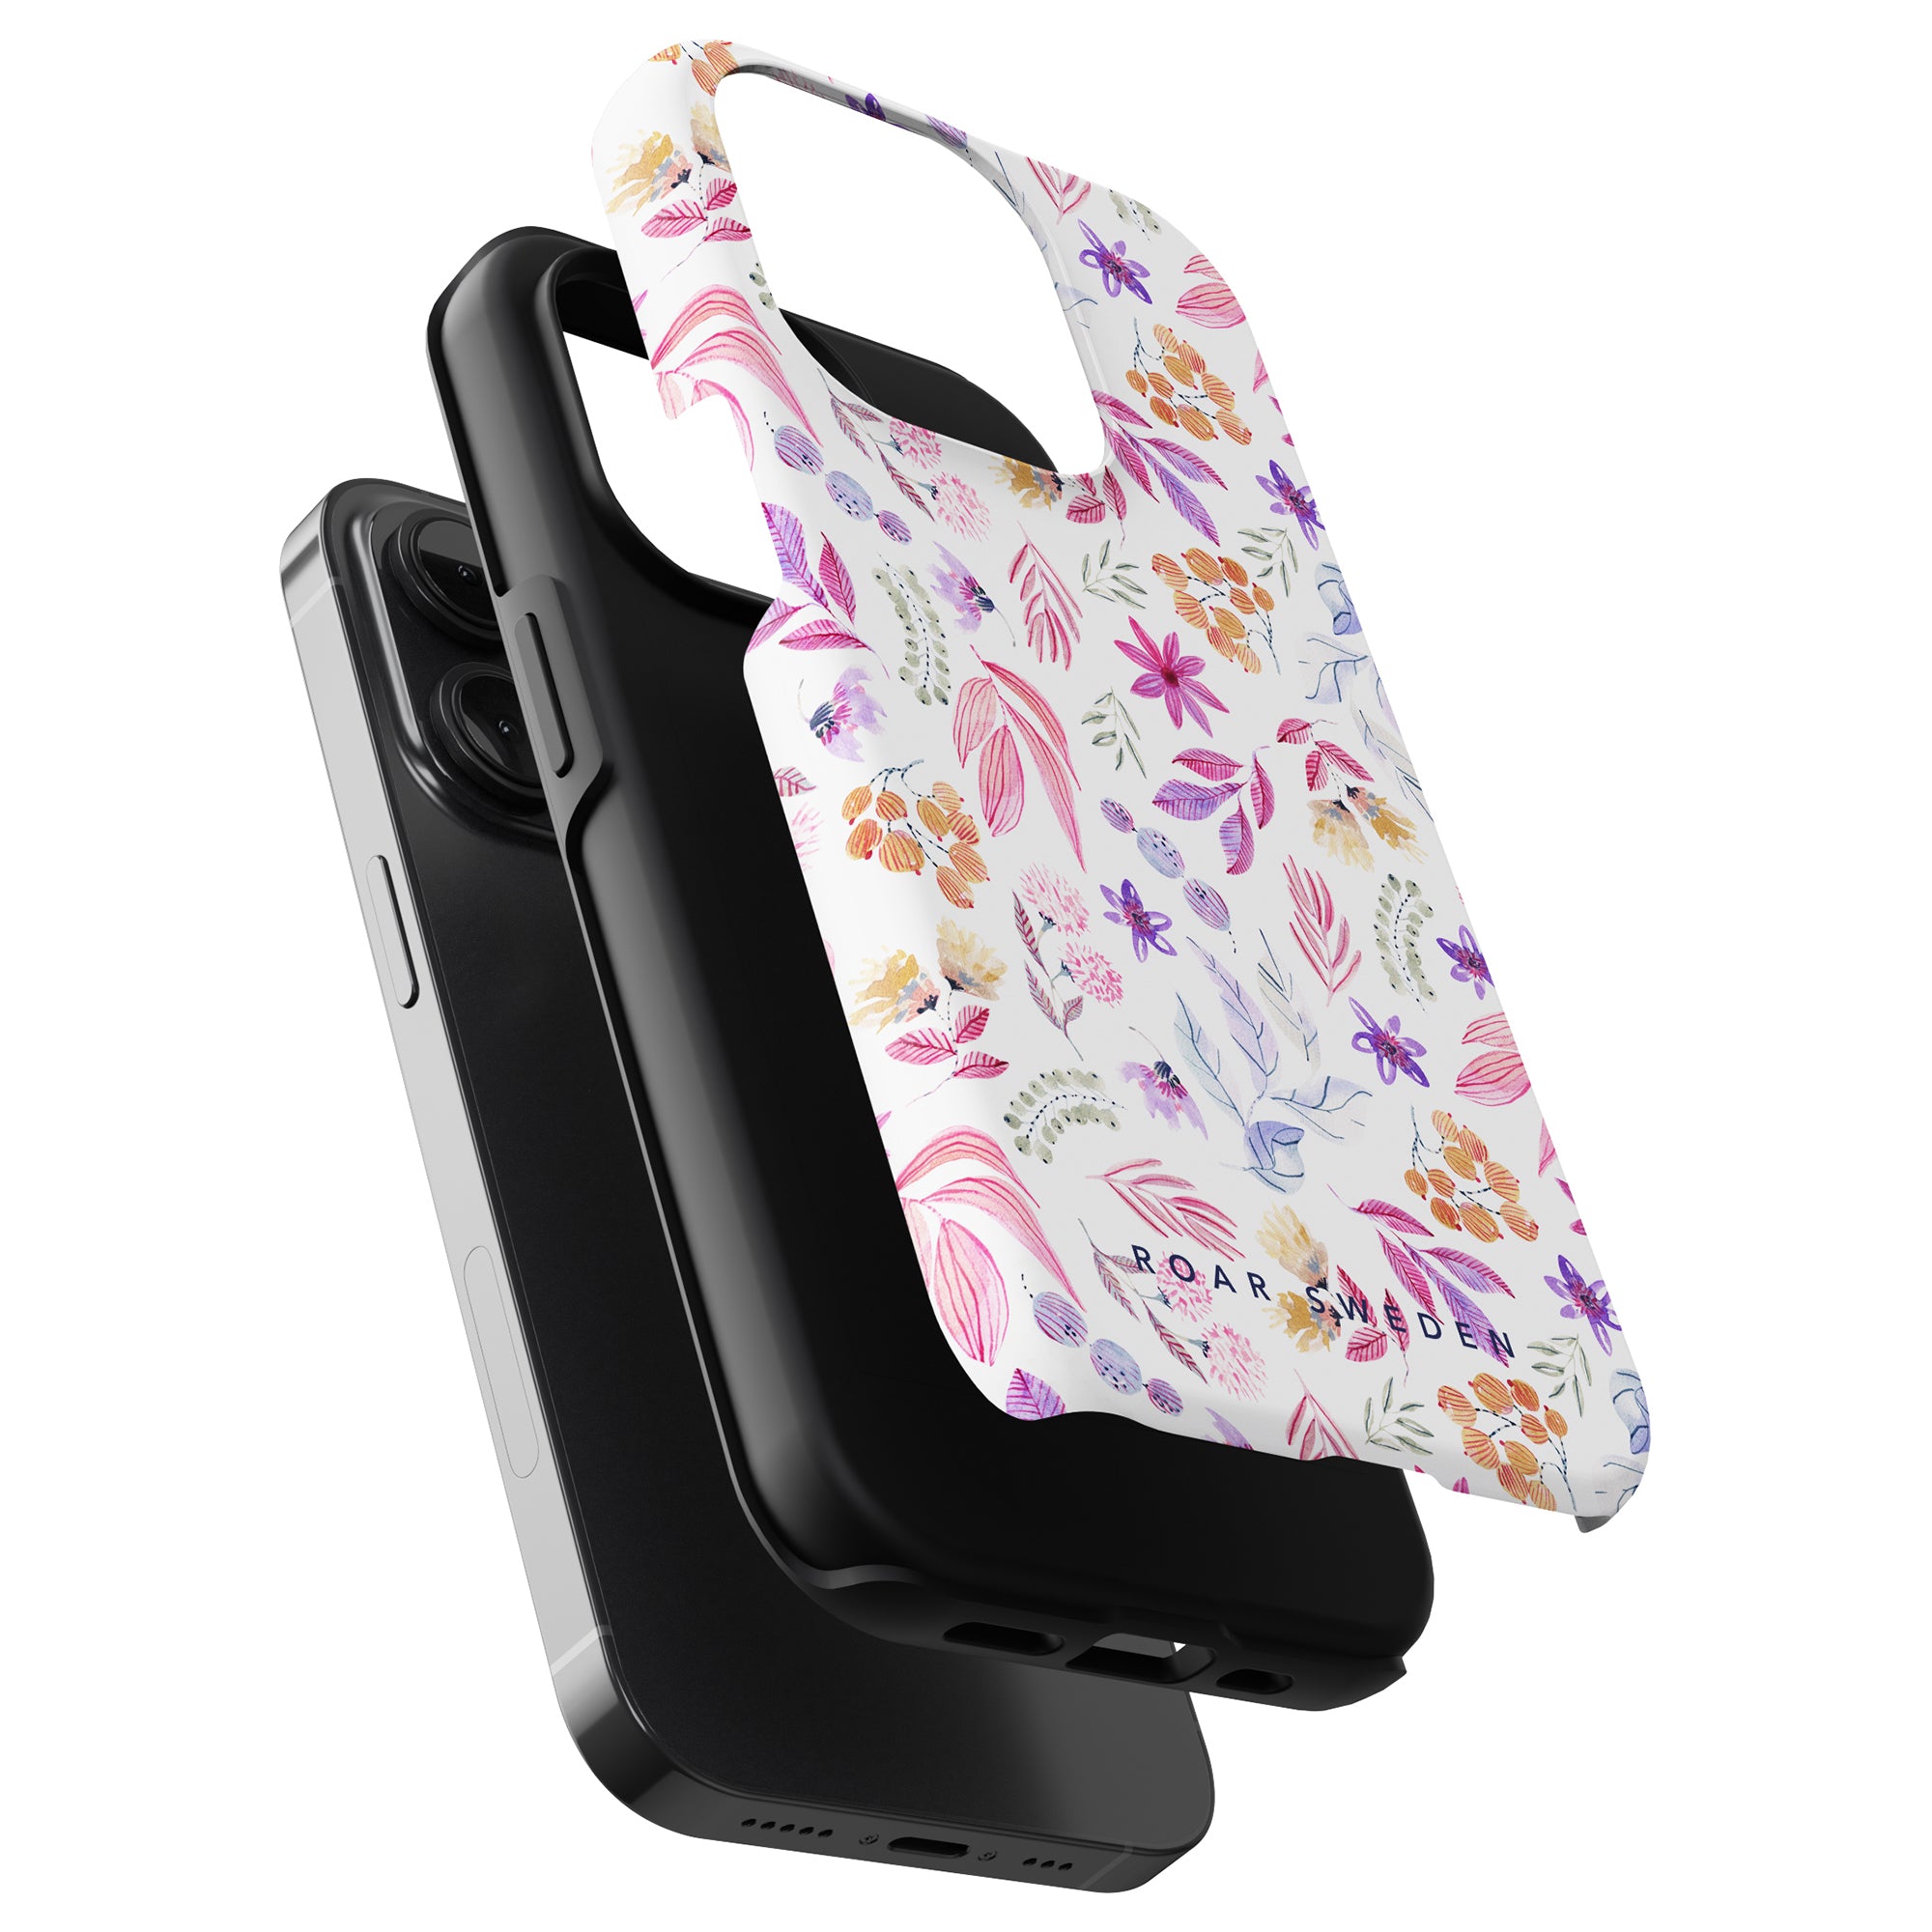 An exploded view of a smartphone and its two cases: one black and one Flower Power - Tough Case featuring a charming pattern, perfect for those who seek both style and maximal skydd.